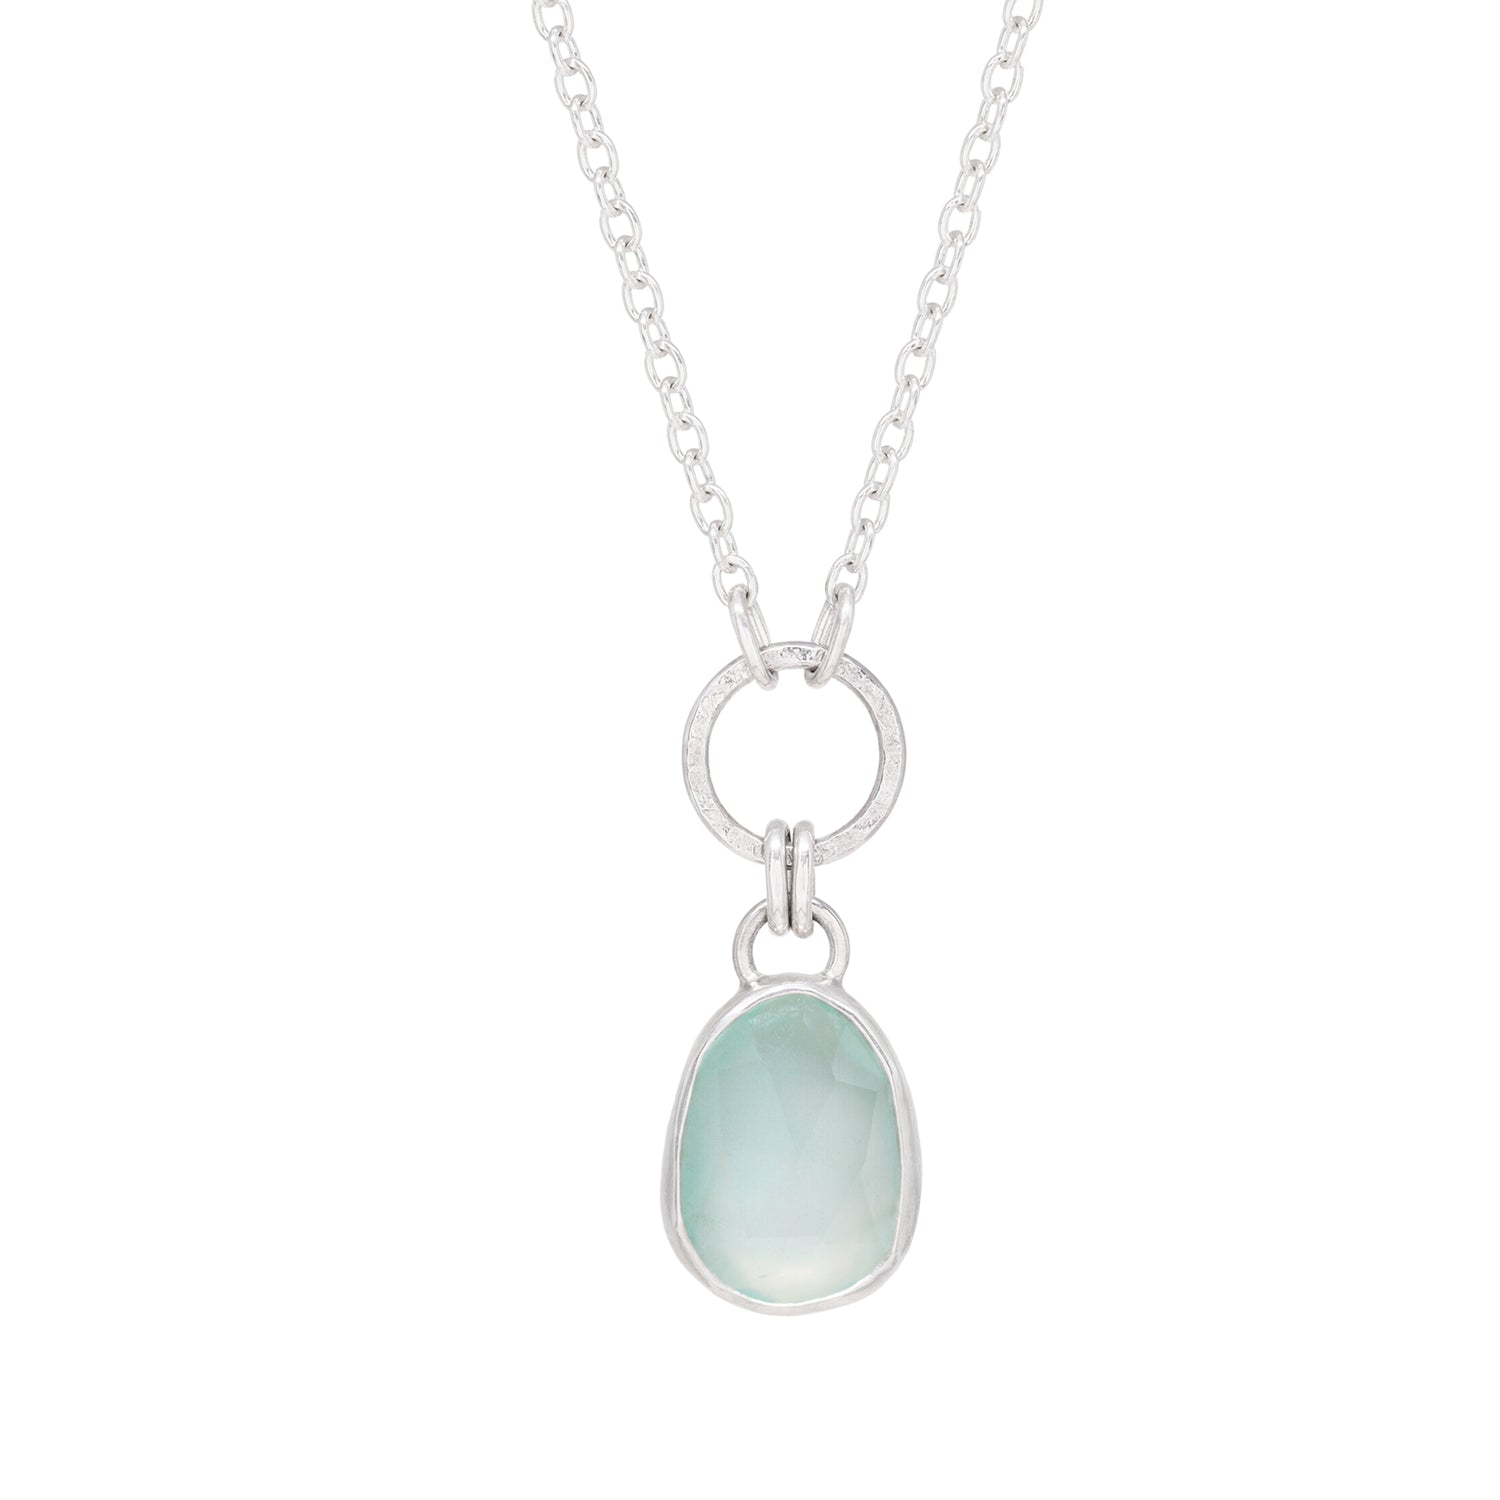 Balance Necklace - Rose Cut Chalcedony - Bright Sterling